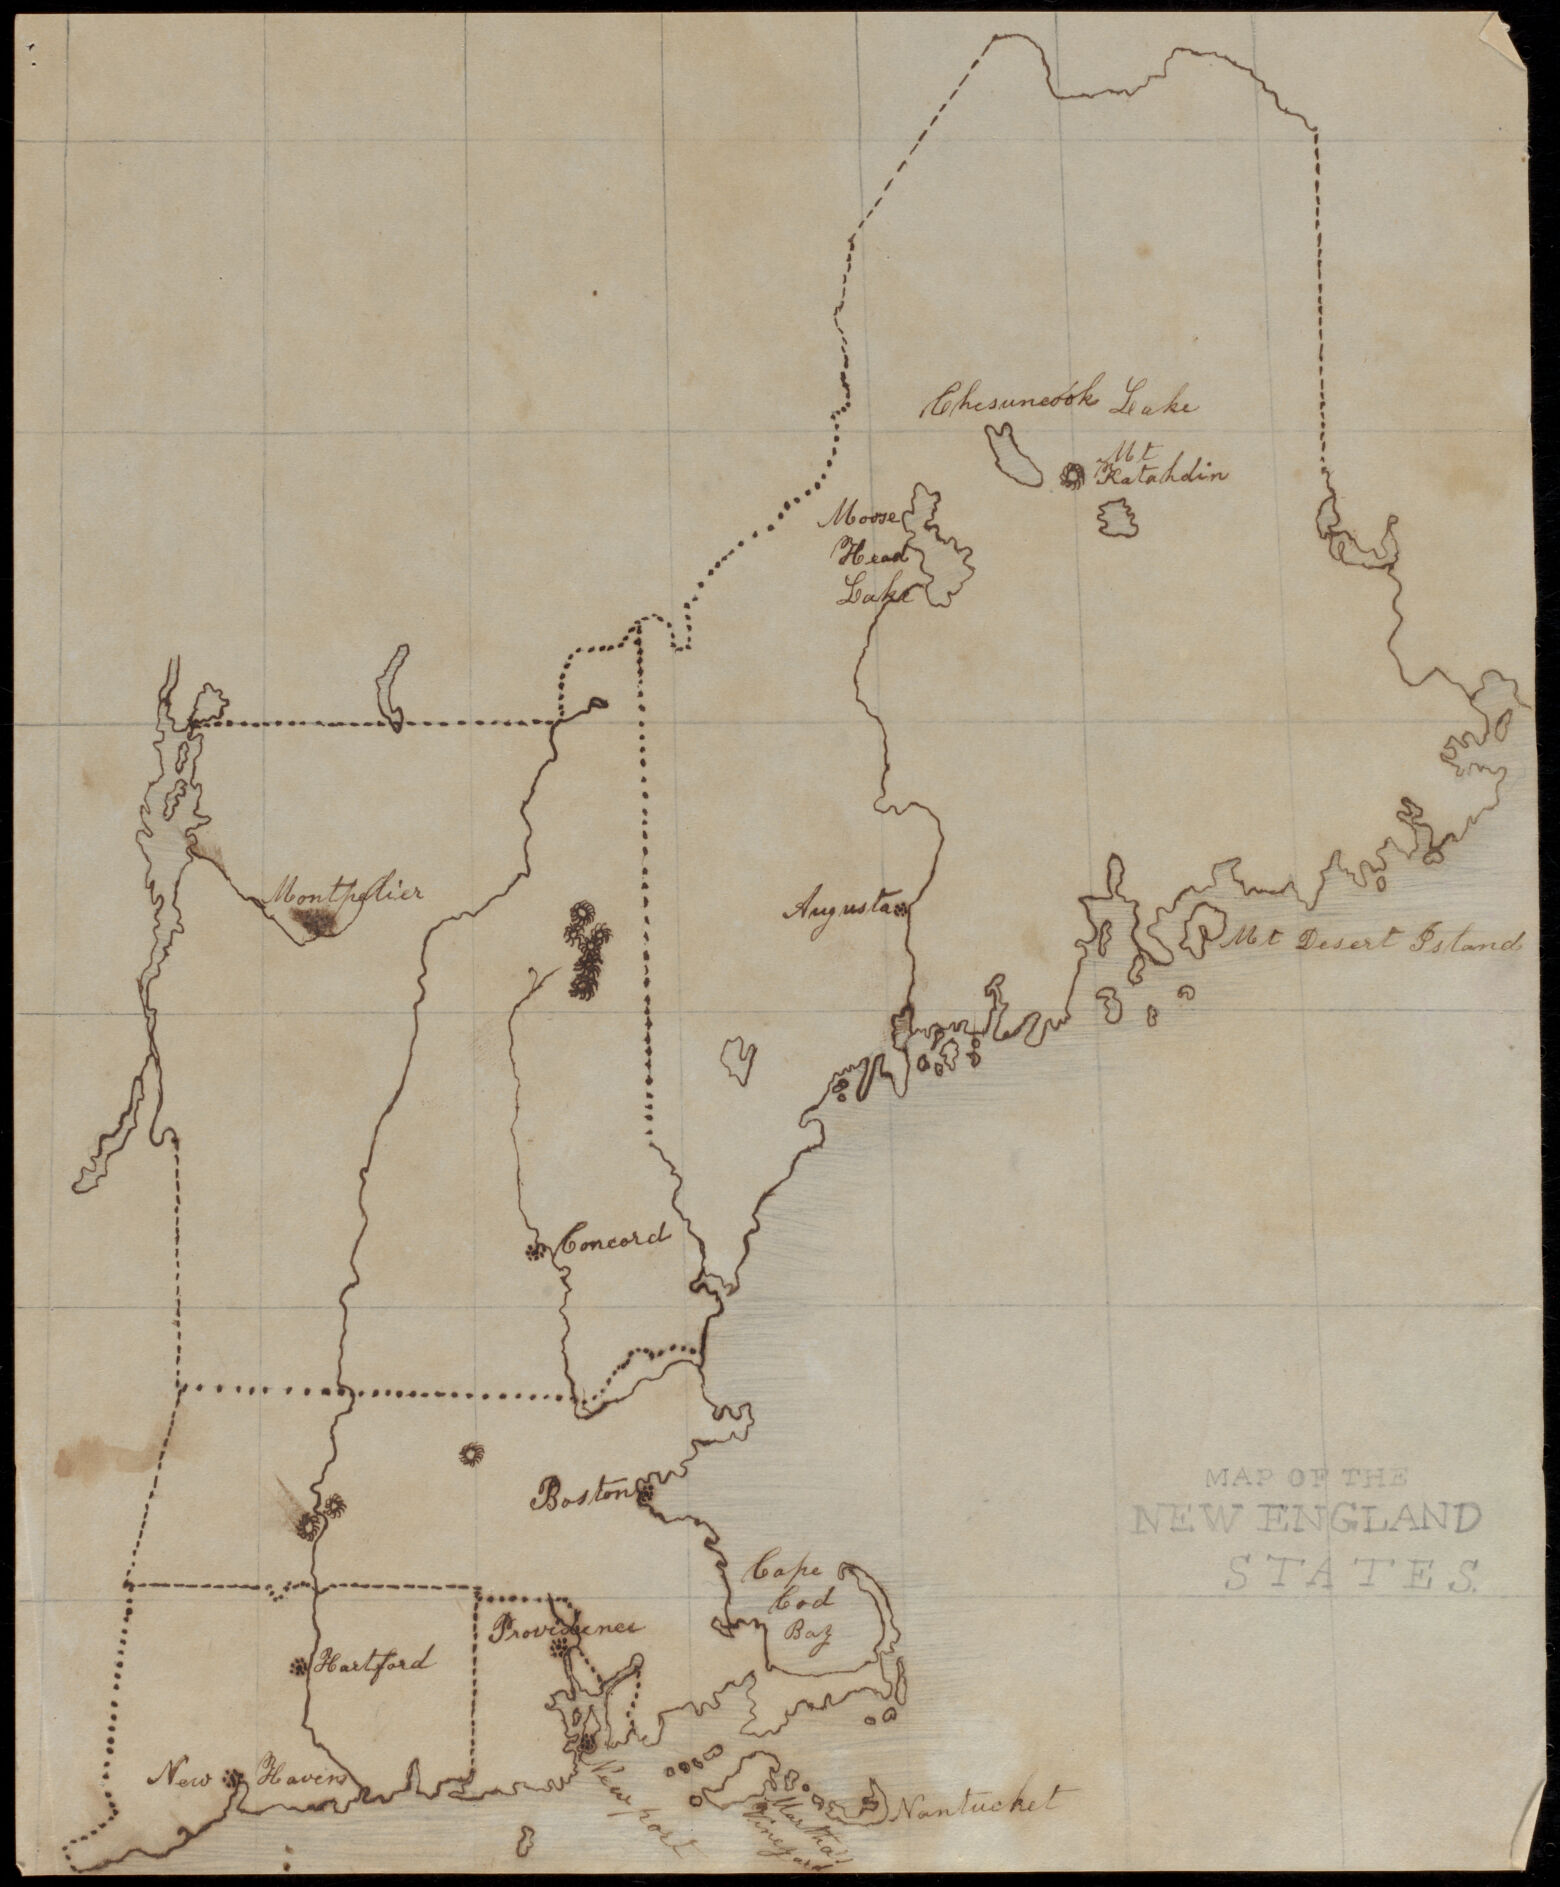 Manuscript map of the United States